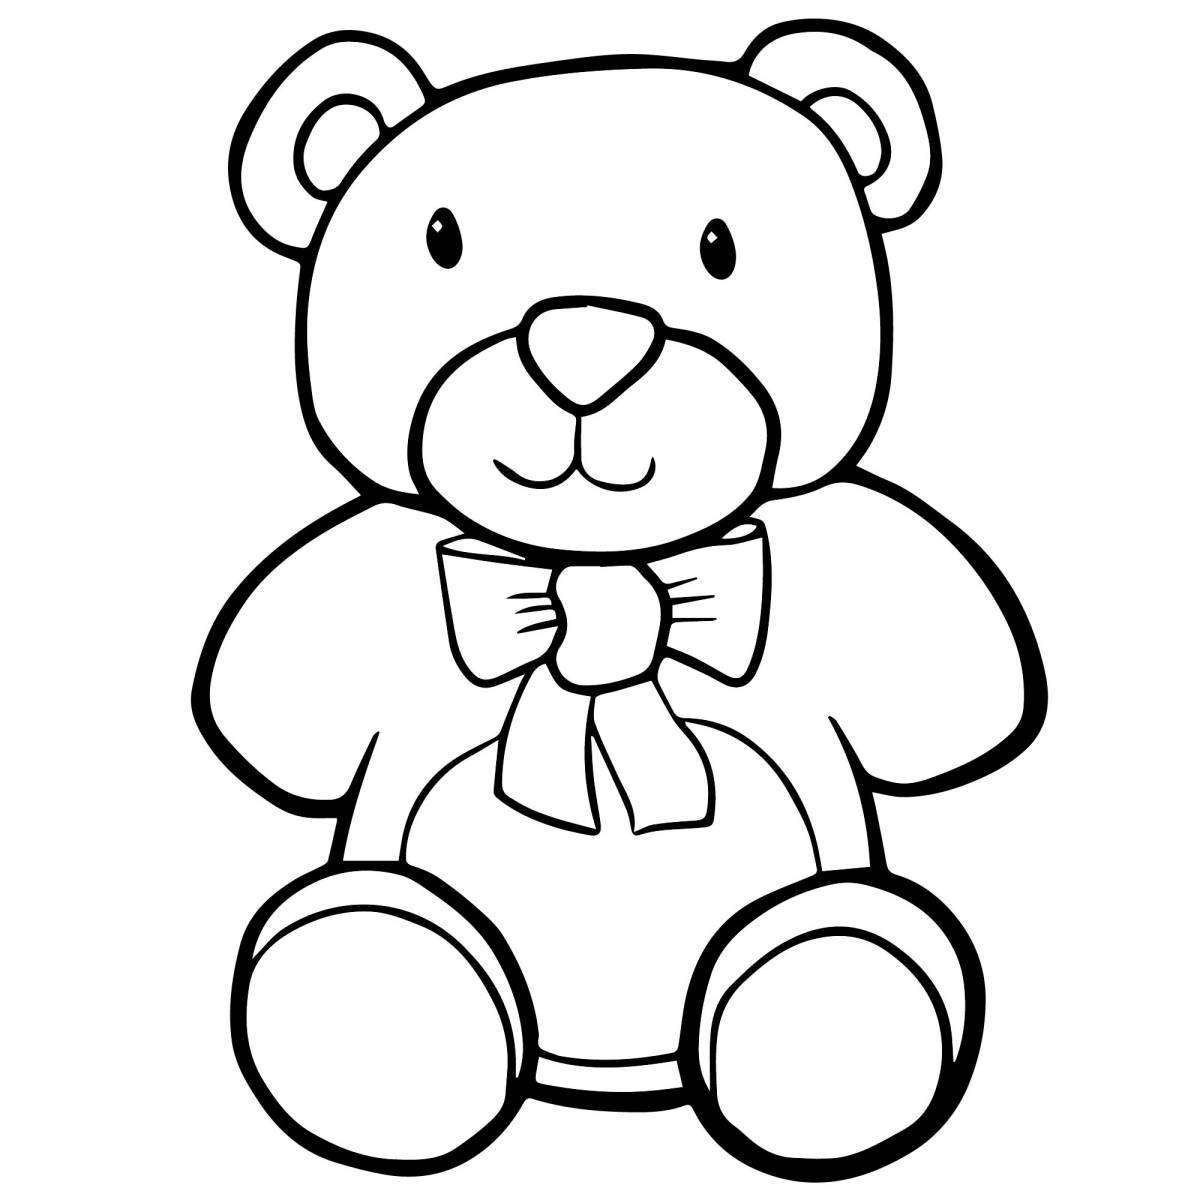 Sparkling teddy bear coloring book for kids